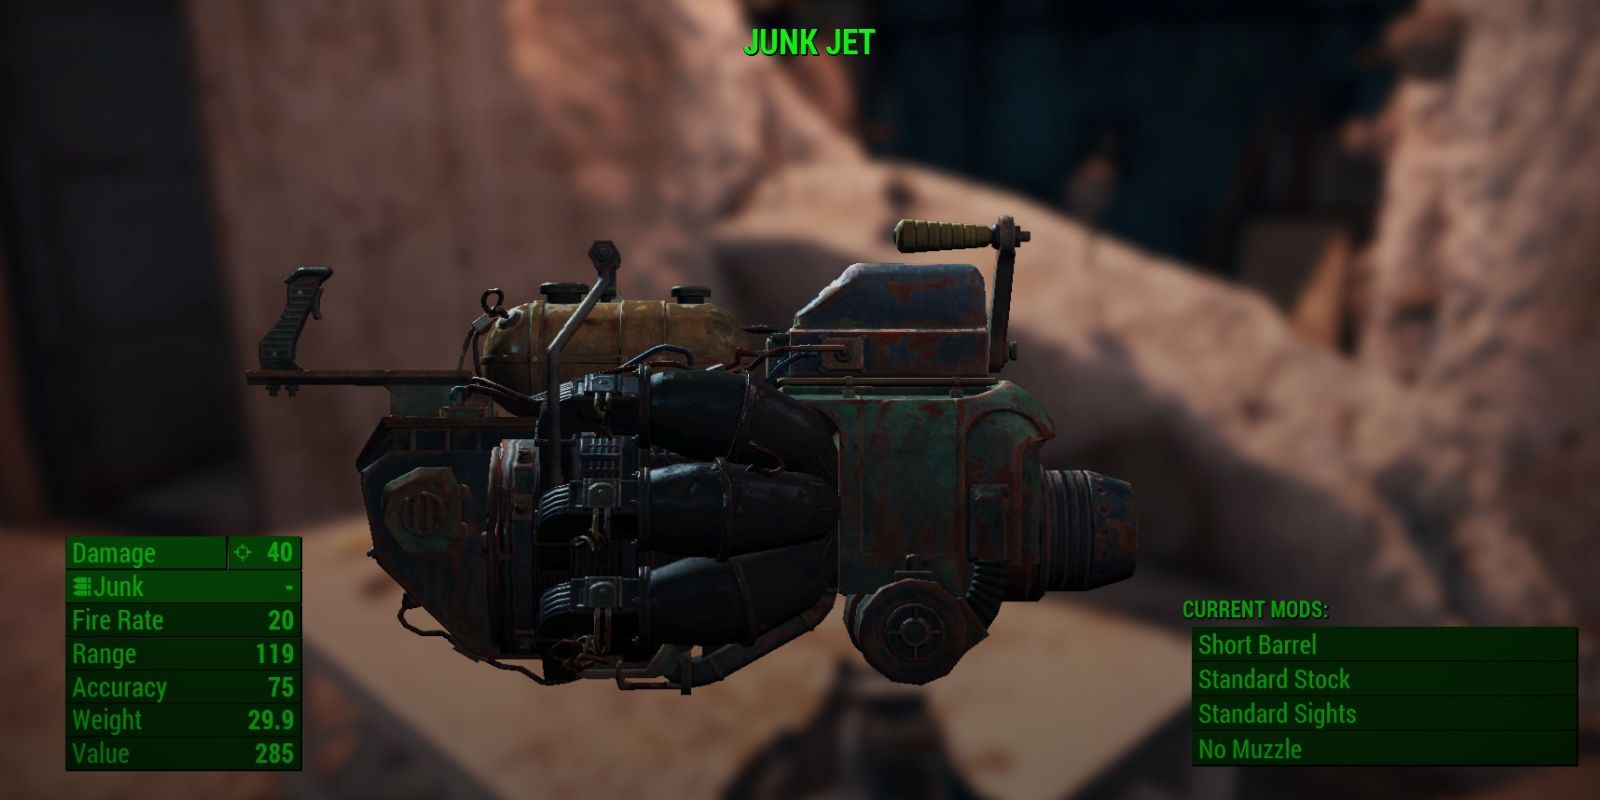 Junk Jet From Fallout 4